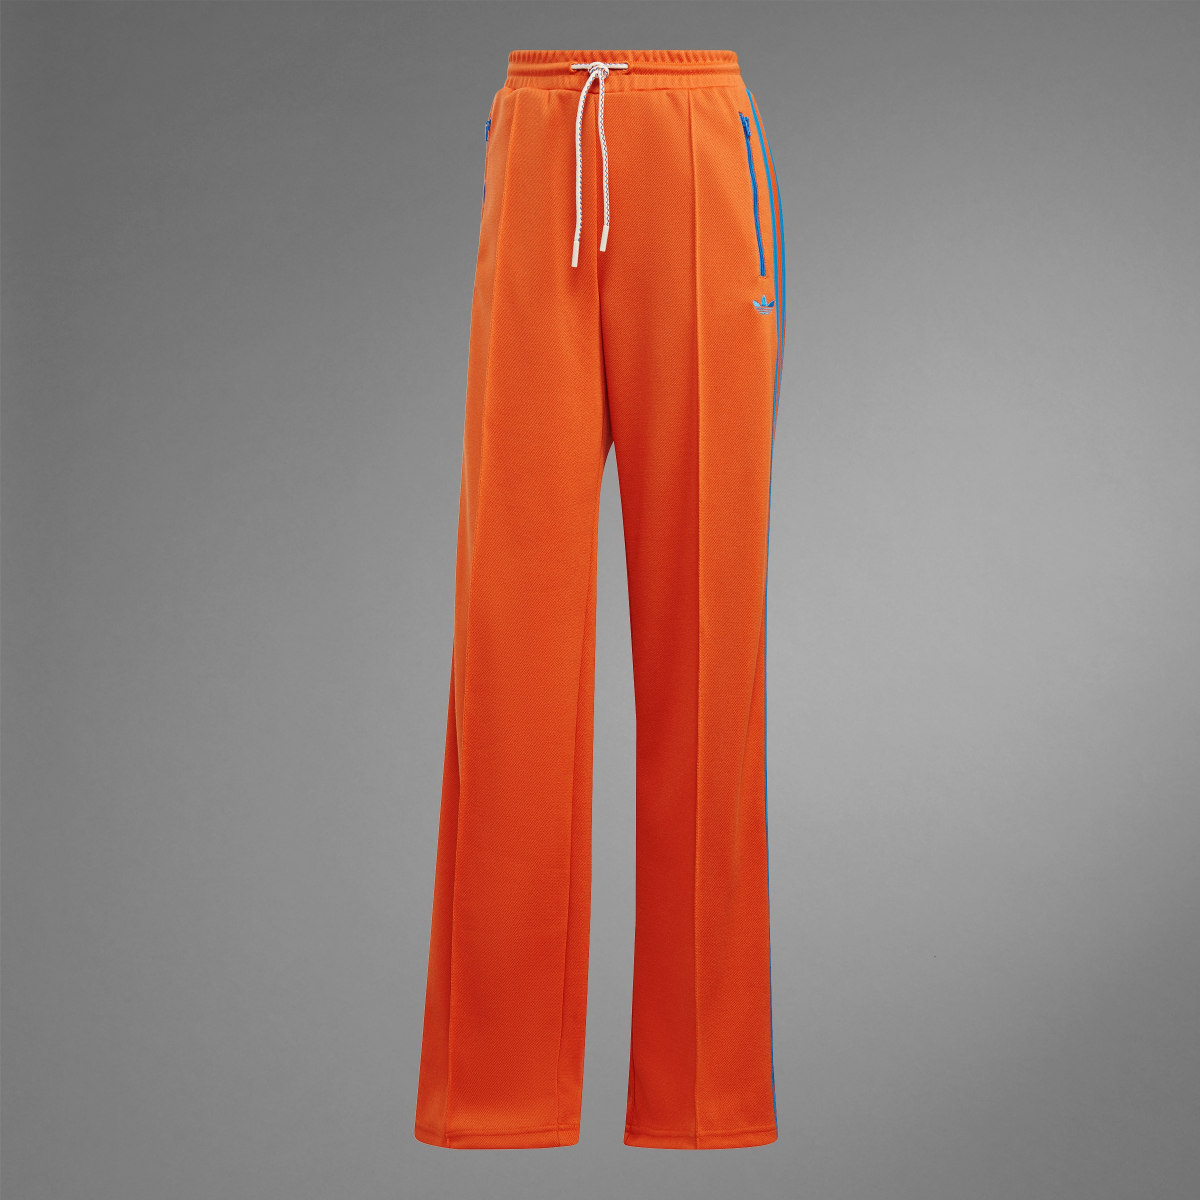 Adidas Adicolor 70s Montreal Tracksuit Bottoms. 10